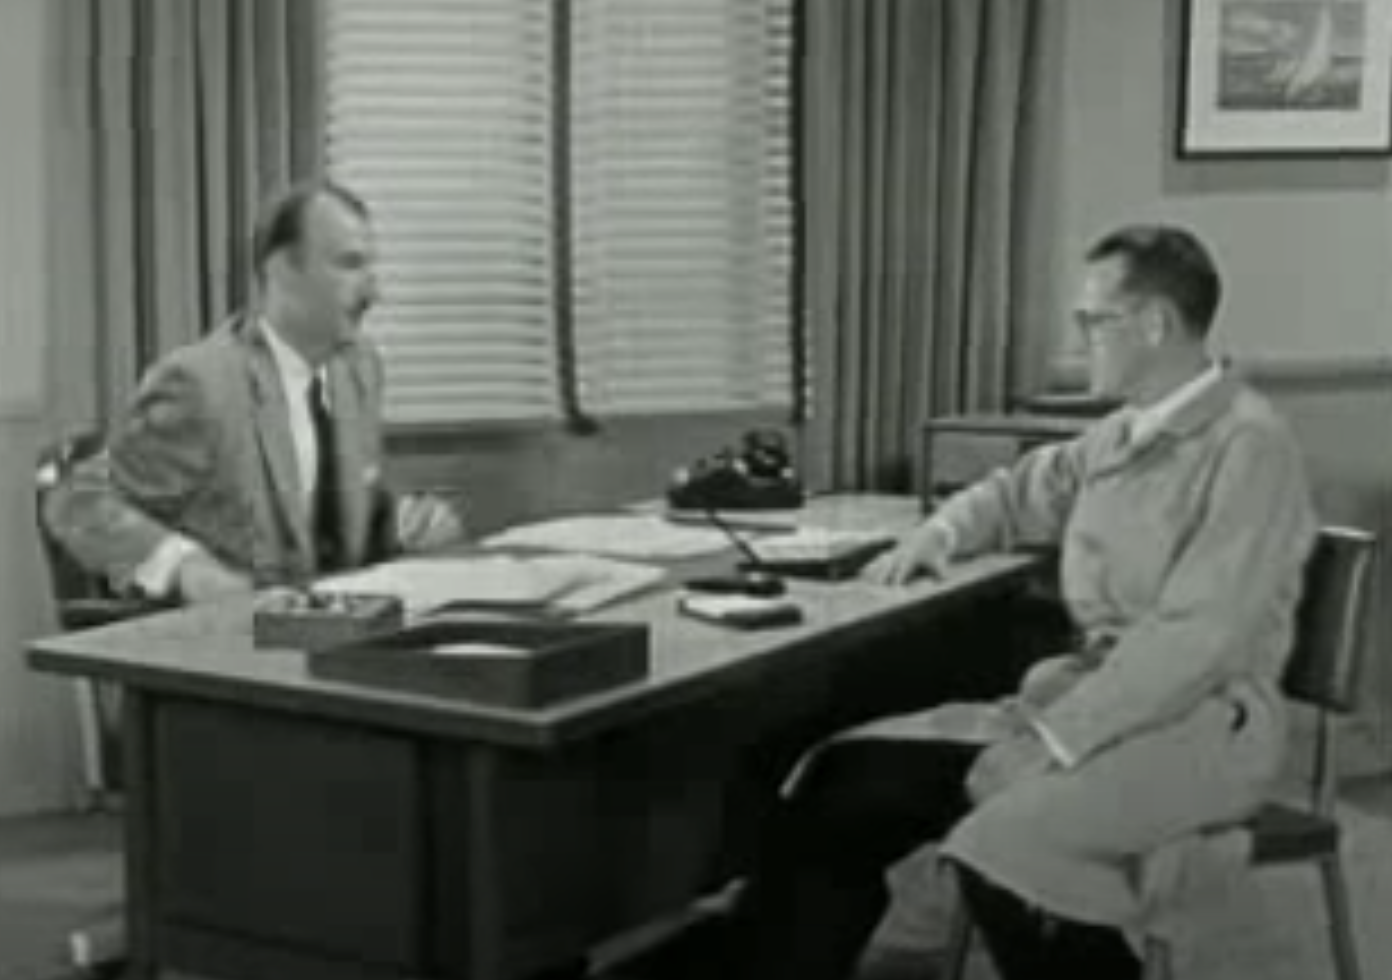 This 1950s Educational Film About Women In The Workplace Is Unintentionally Hilarious 1